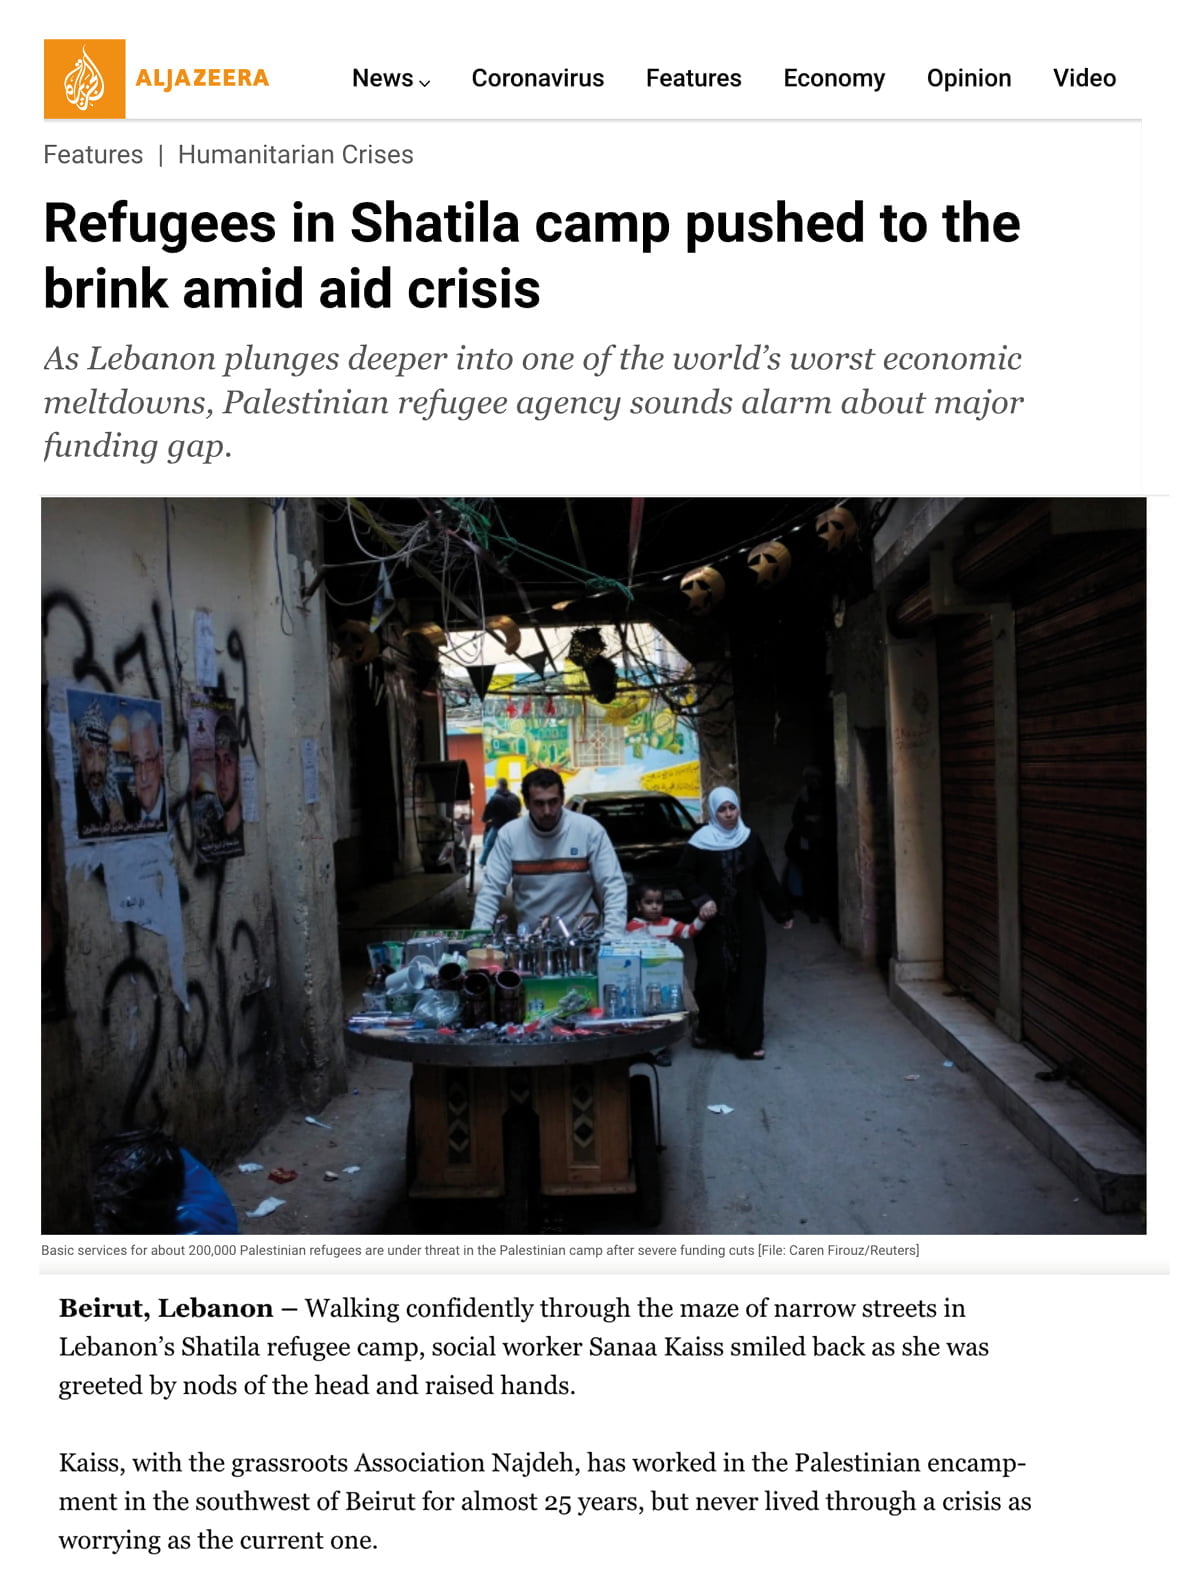 Refugees in Shatila camp pushed to the brink amid aid crisis